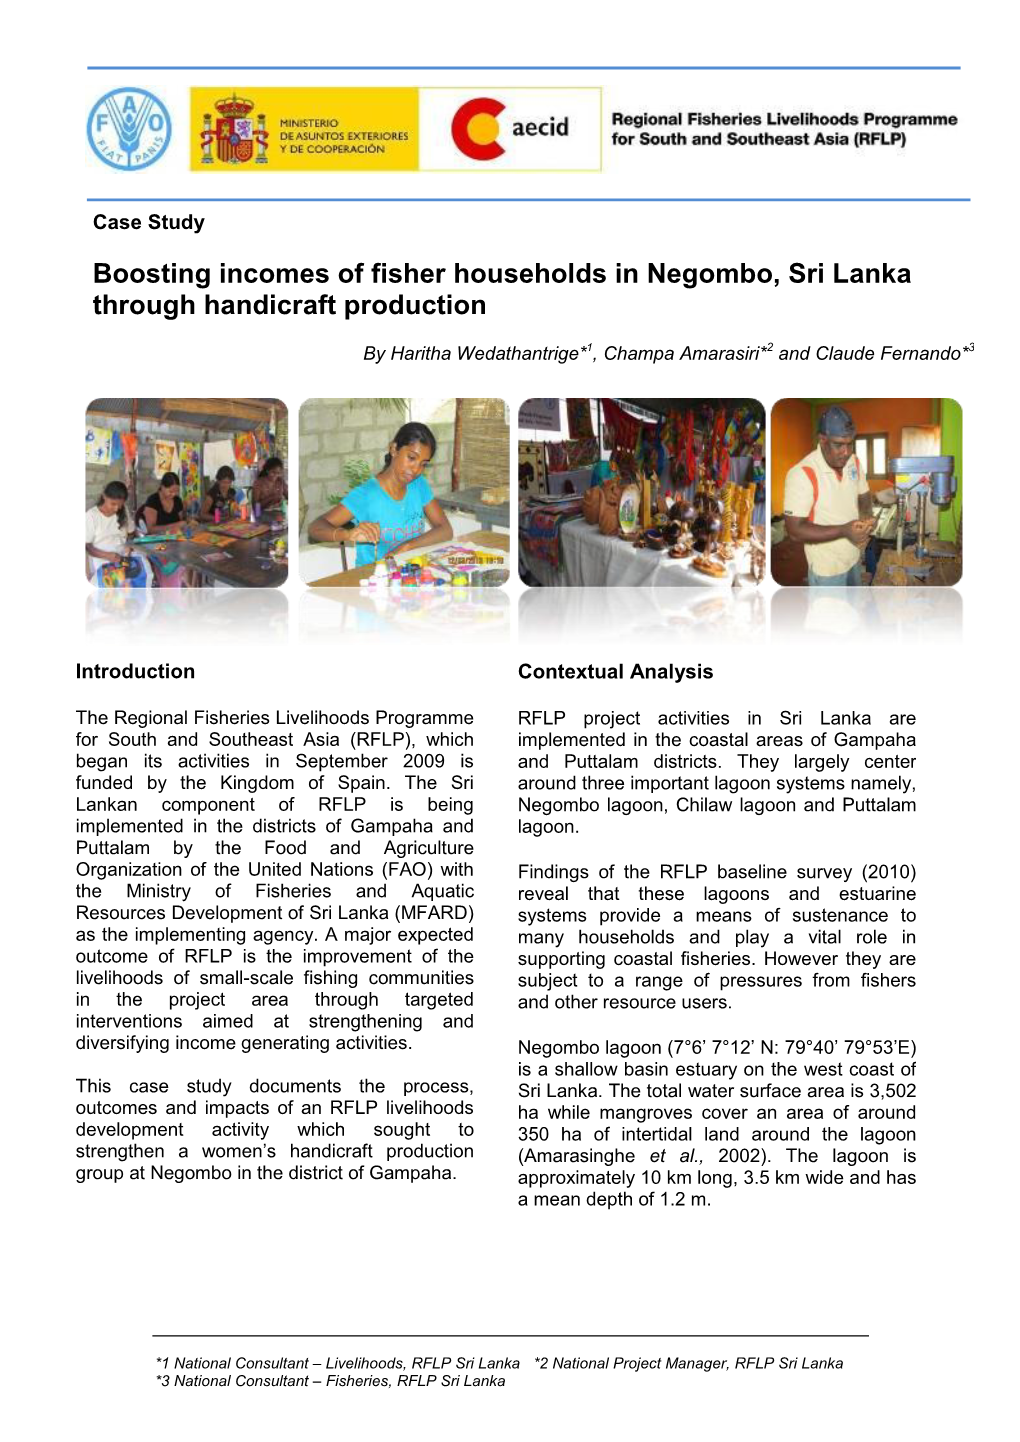 Boosting Incomes of Fisher Households in Negombo, Sri Lanka Through Handicraft Production